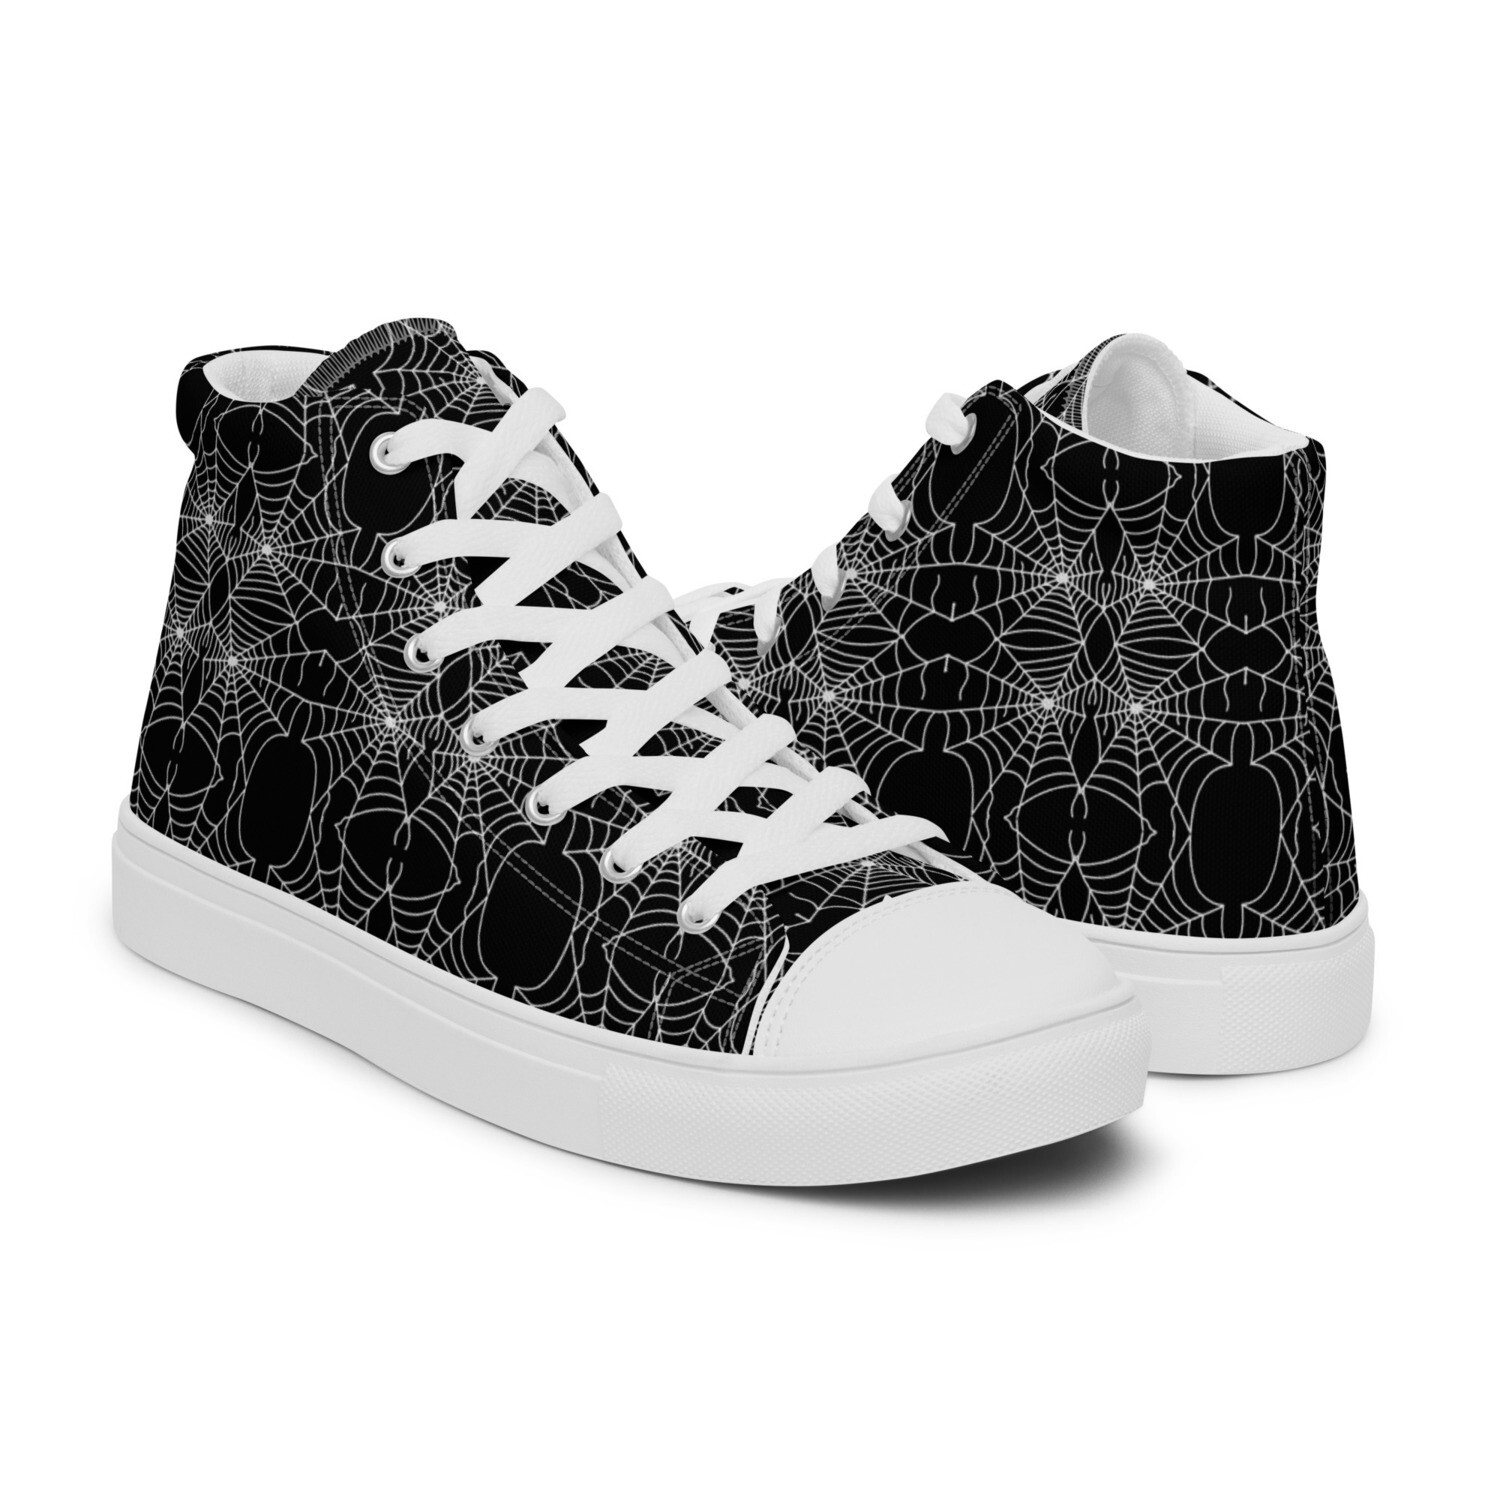 Spider Webs Women’s high top canvas shoes